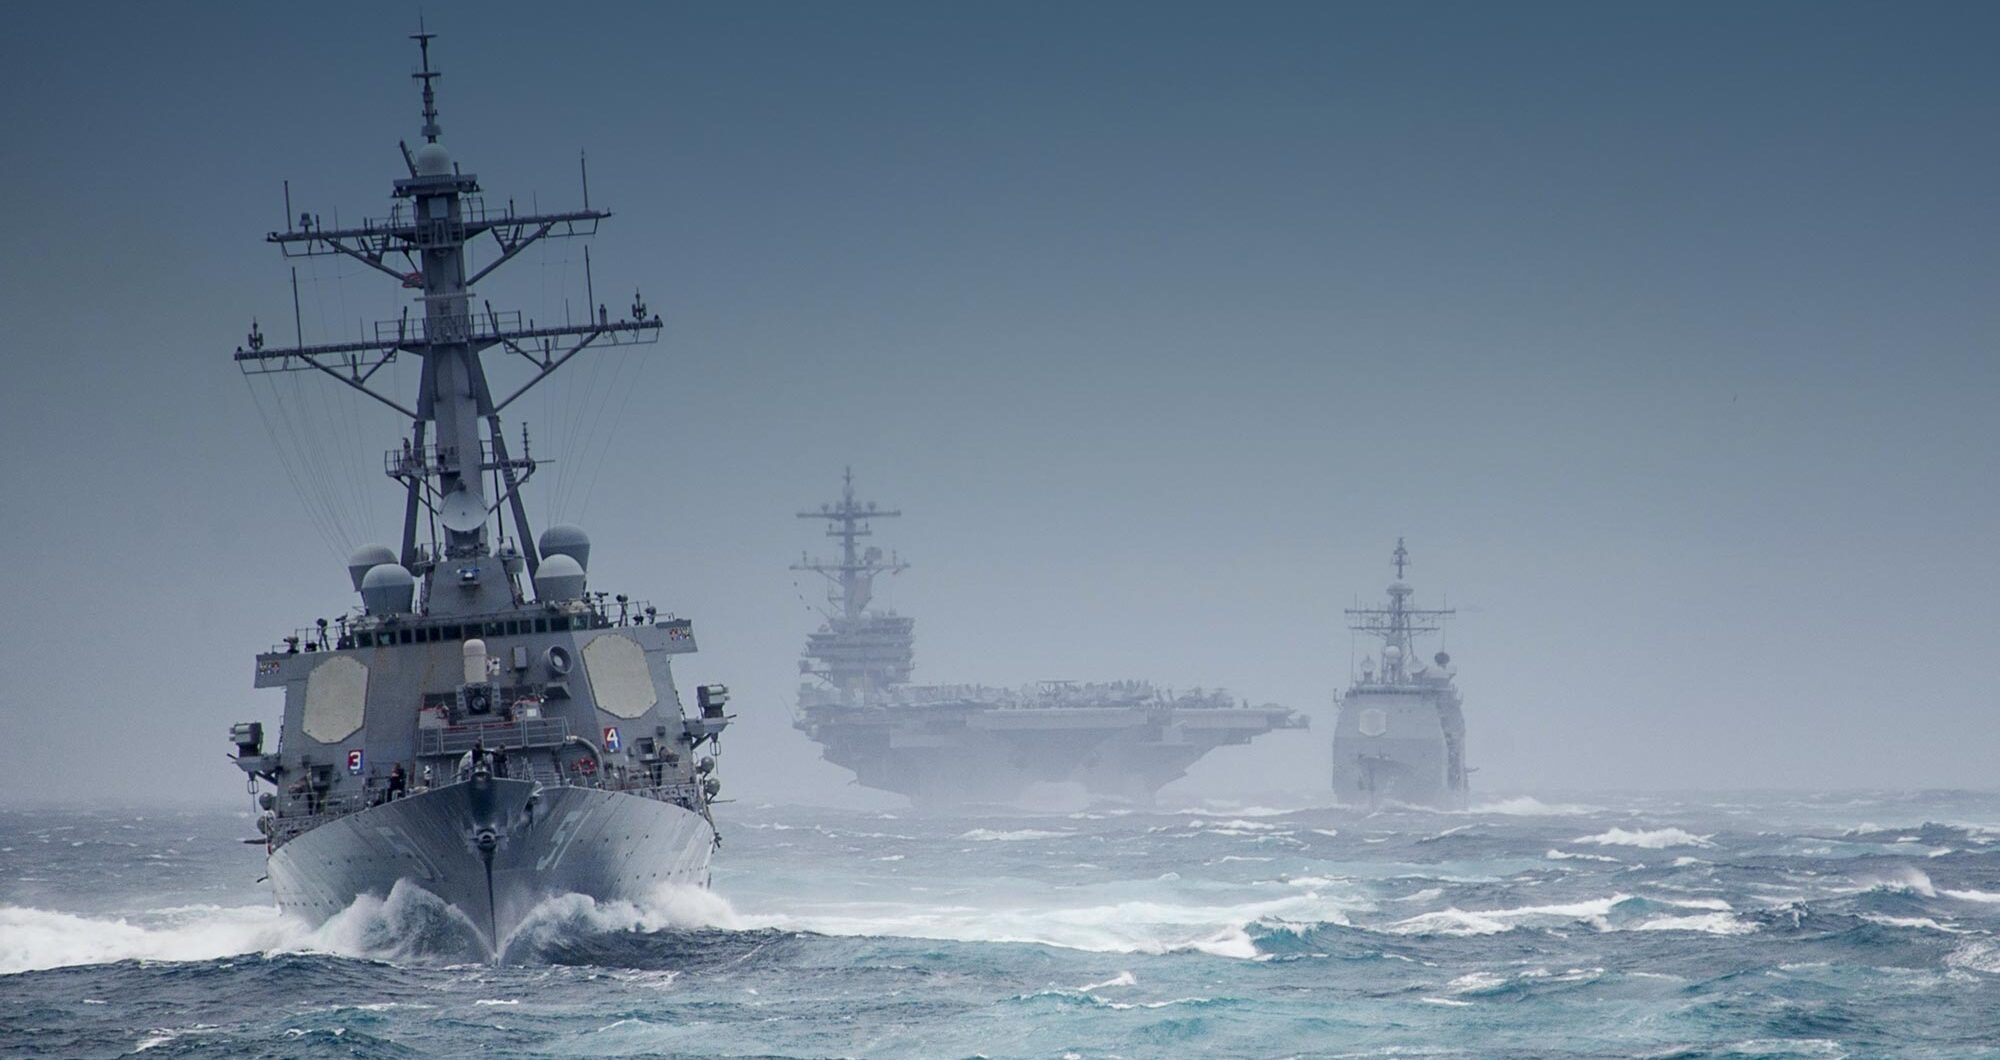 naval-warship-and-aricraft-carrier-on-choppy-sea